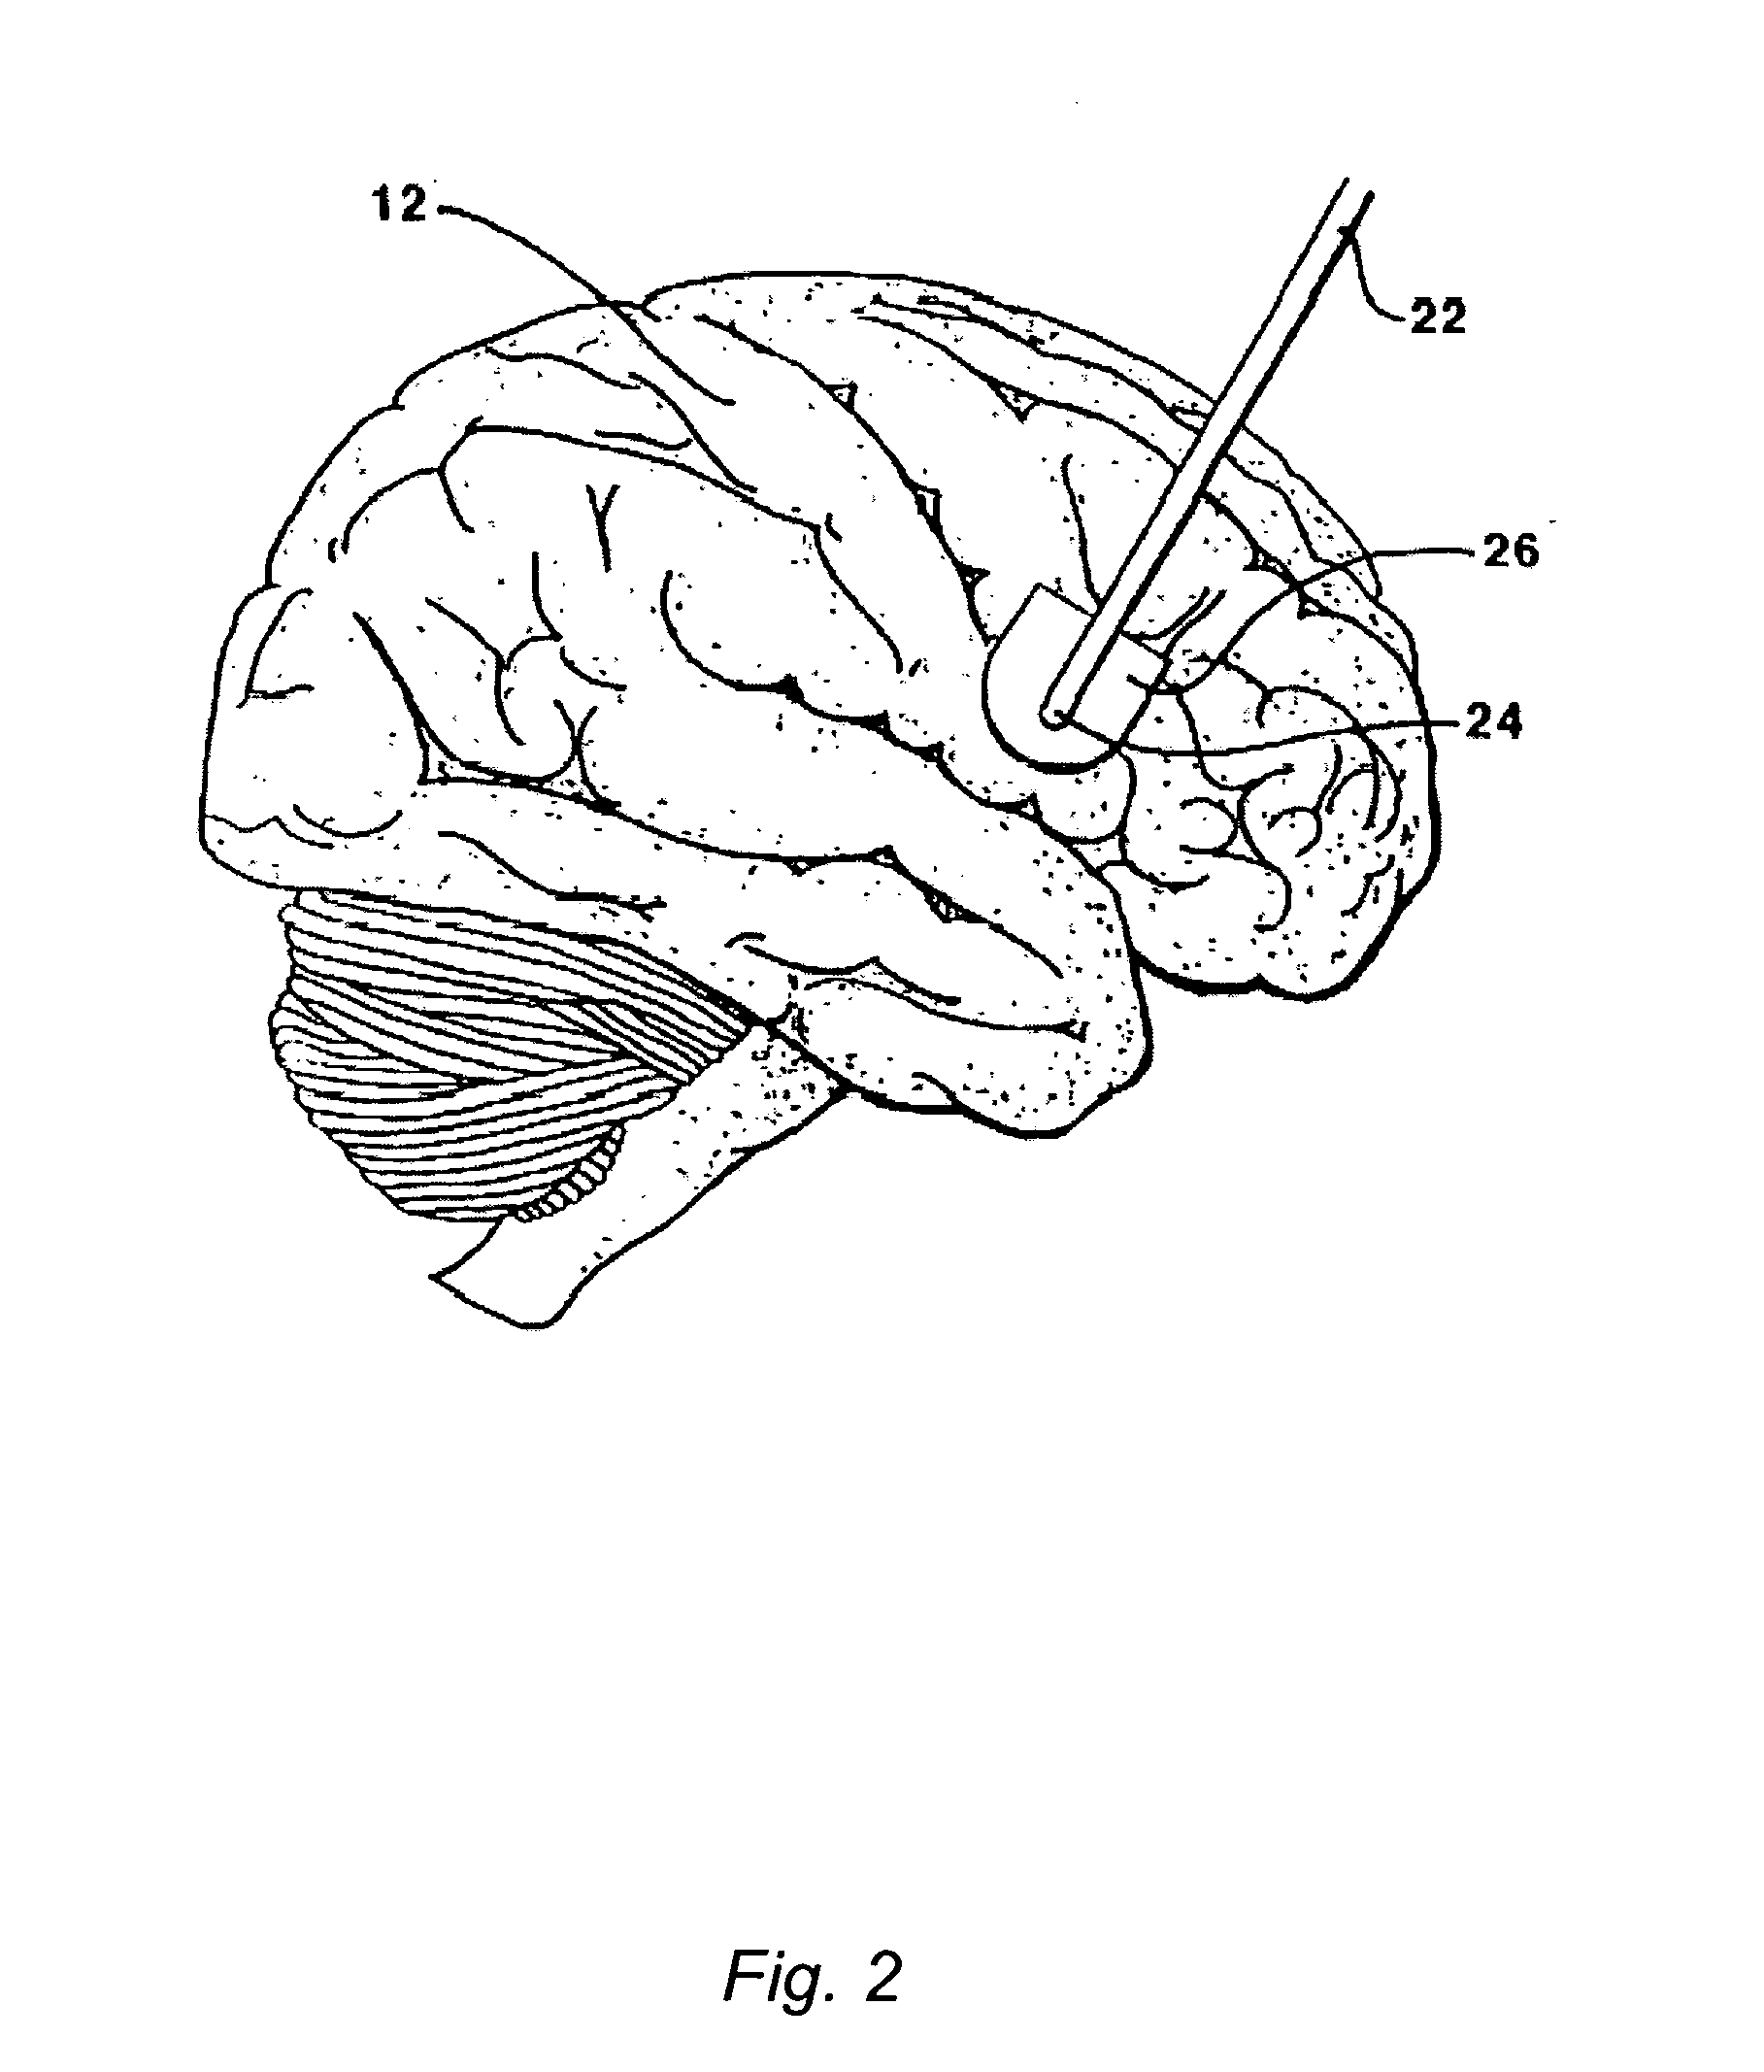 Methods and Systems for Treatment of Neurological Diseases of the Central Nervous System